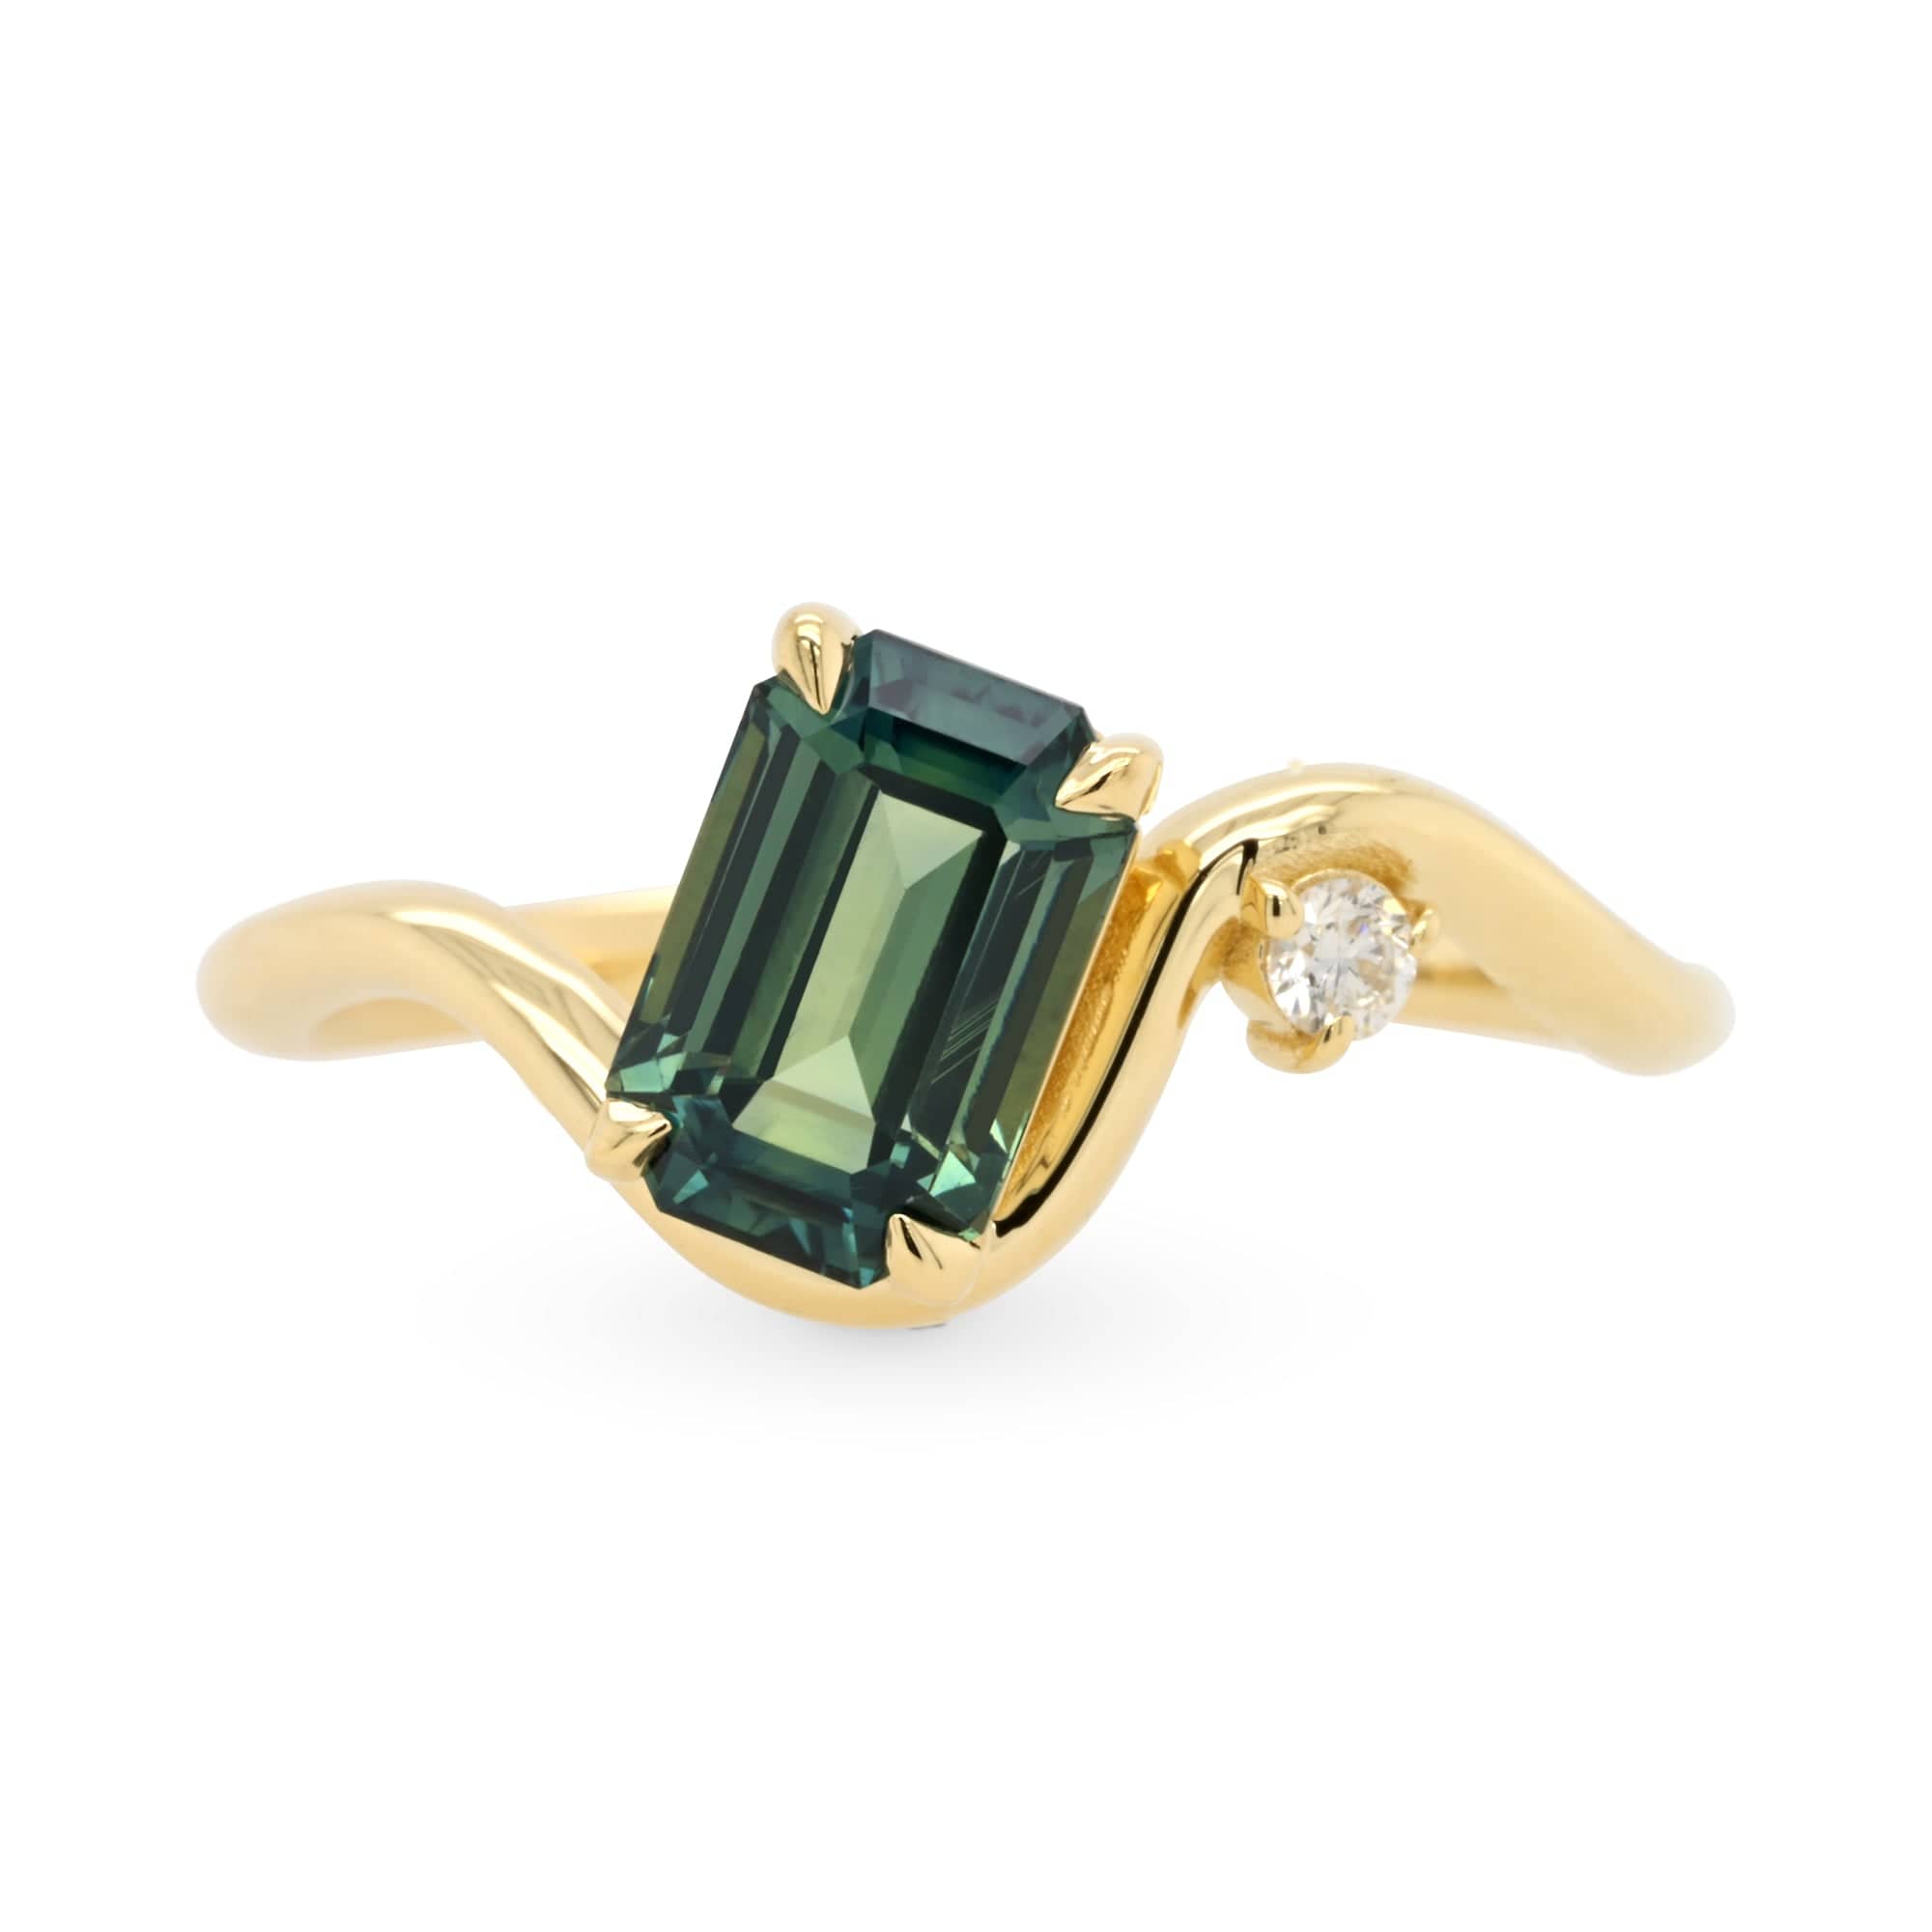 Sculptural 14k yellow gold emerald cut teal sapphire and white diamond engagement ring